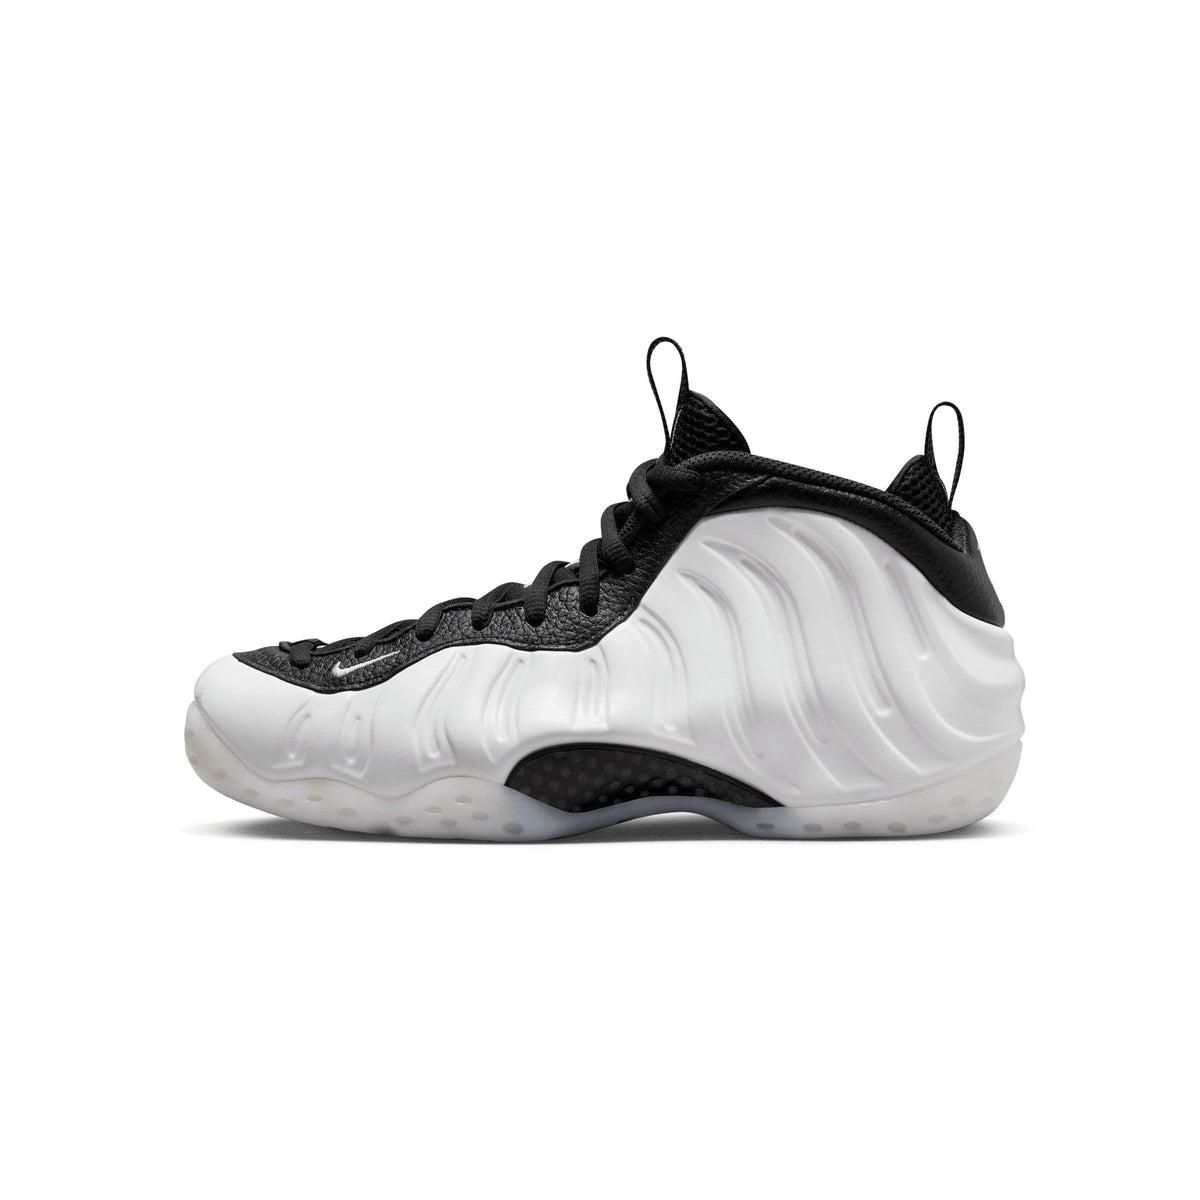 Nike Air Foamposite One Shoes